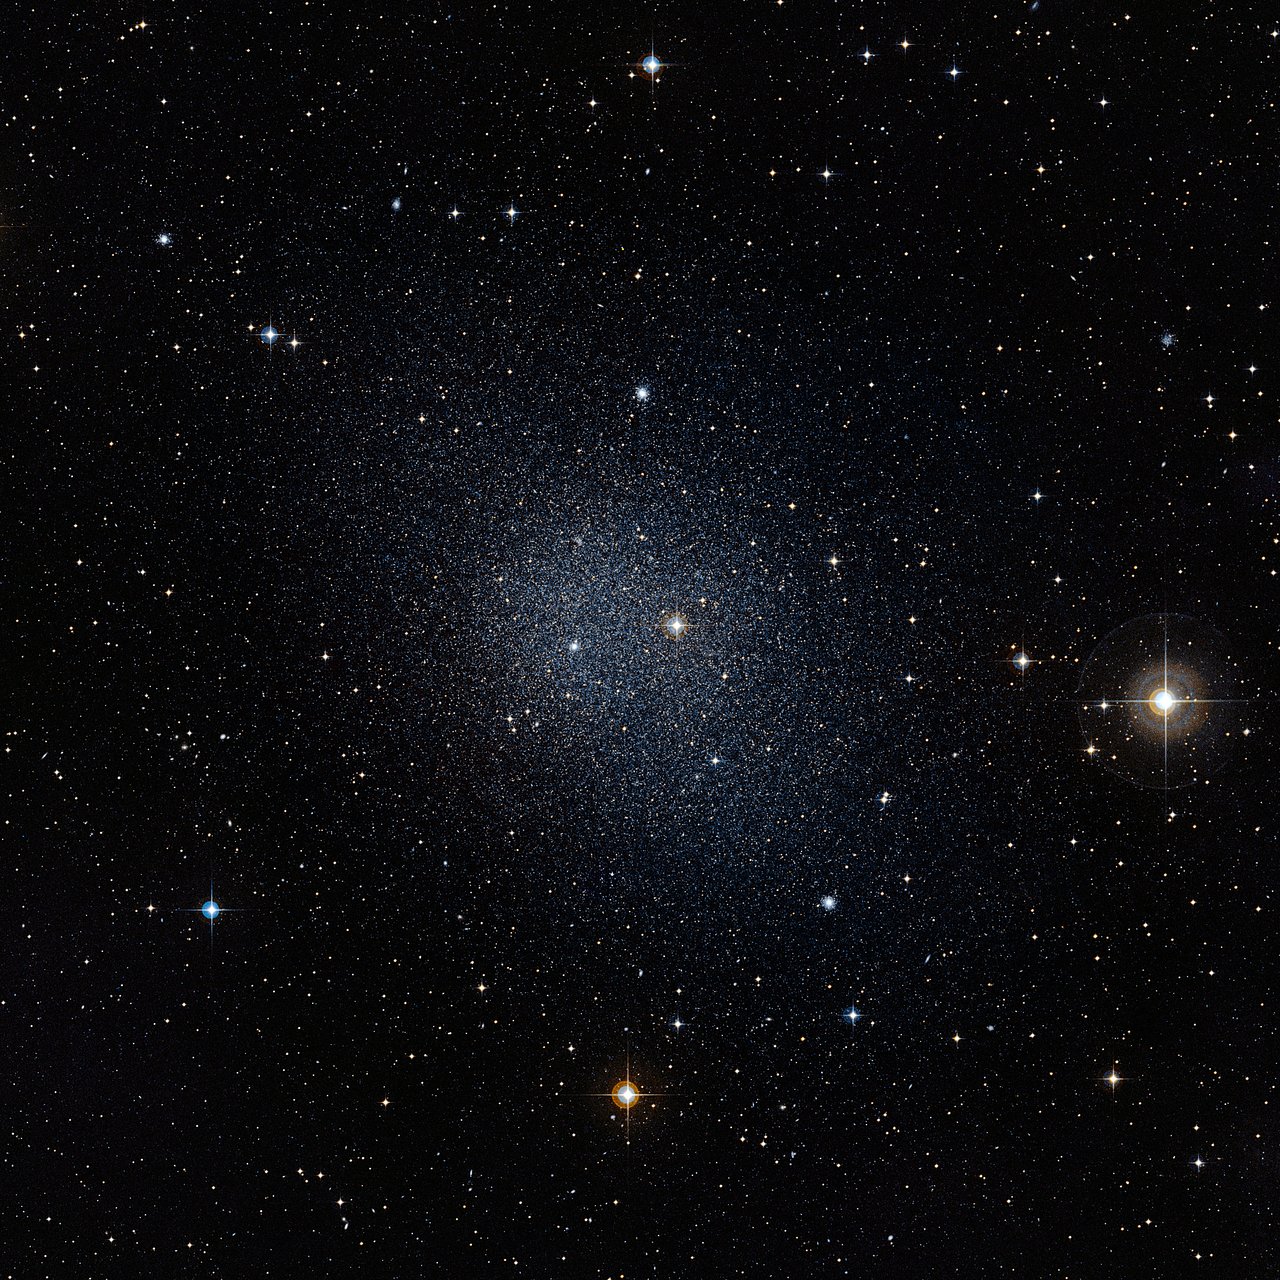 http://www.eso.org/public/archives/images/screen/eso1007a.jpg